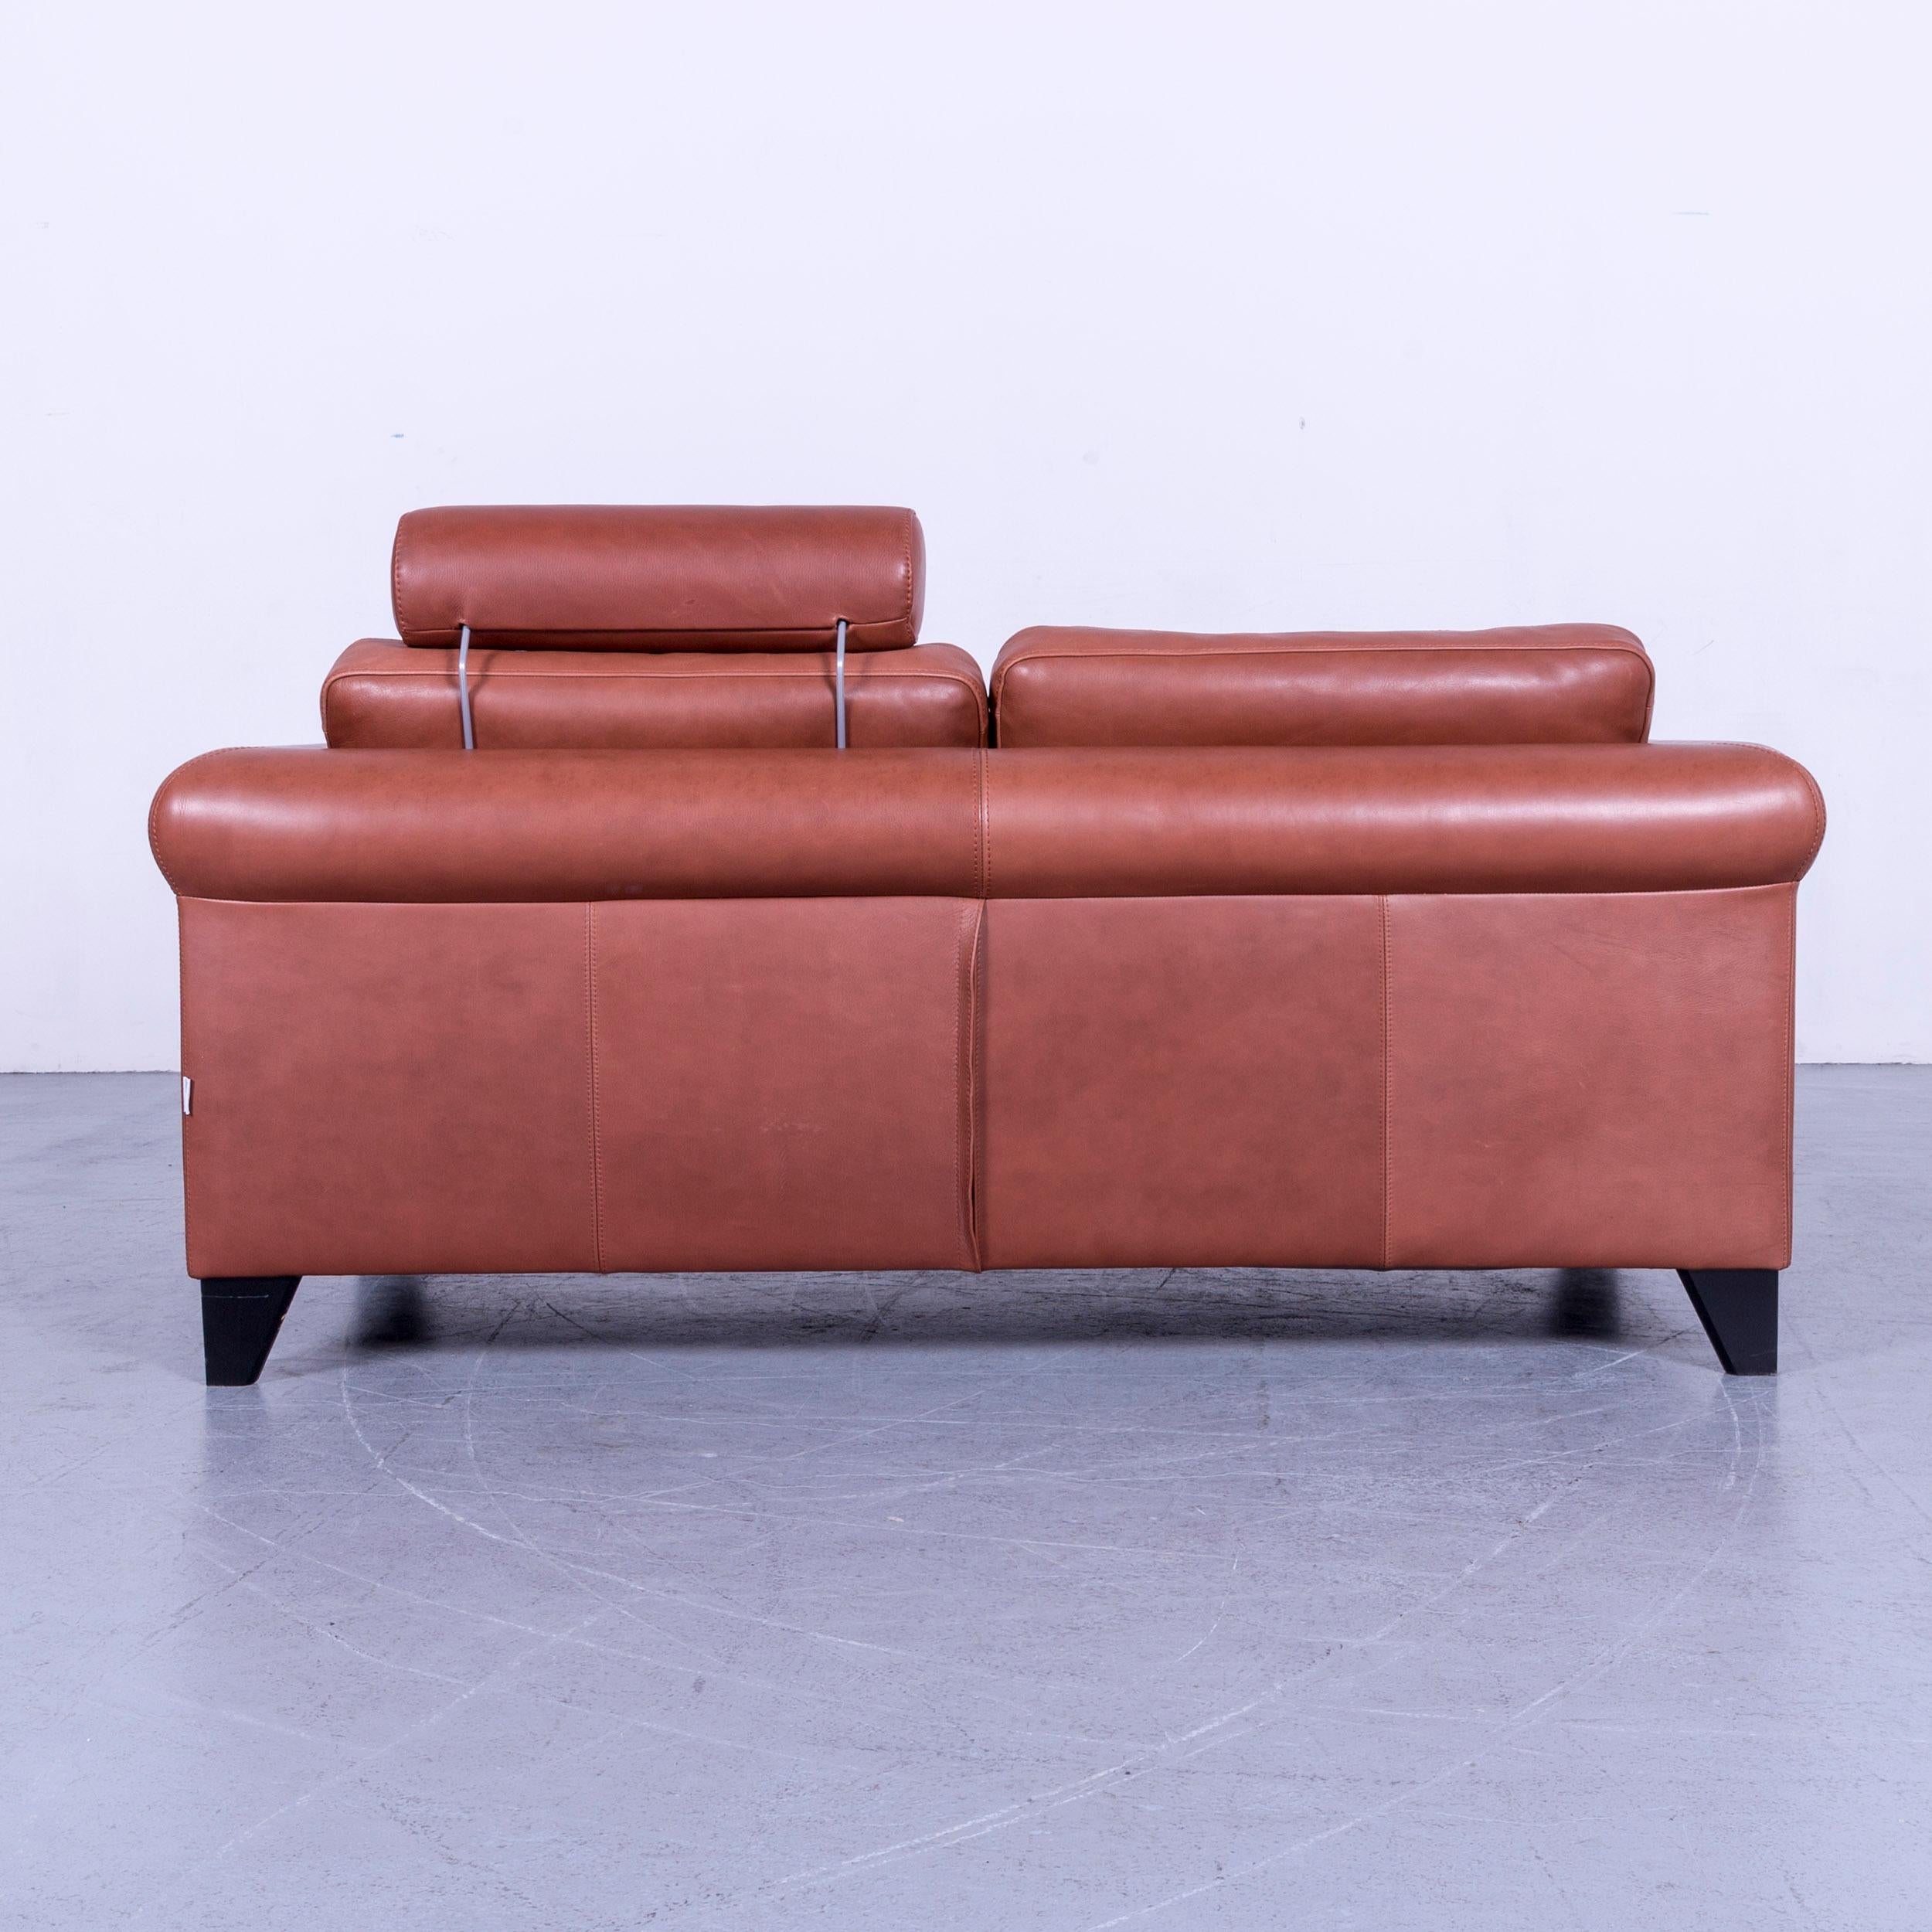 Machalke Designer Leather Sofa Red Two-Seat Couch Set 8